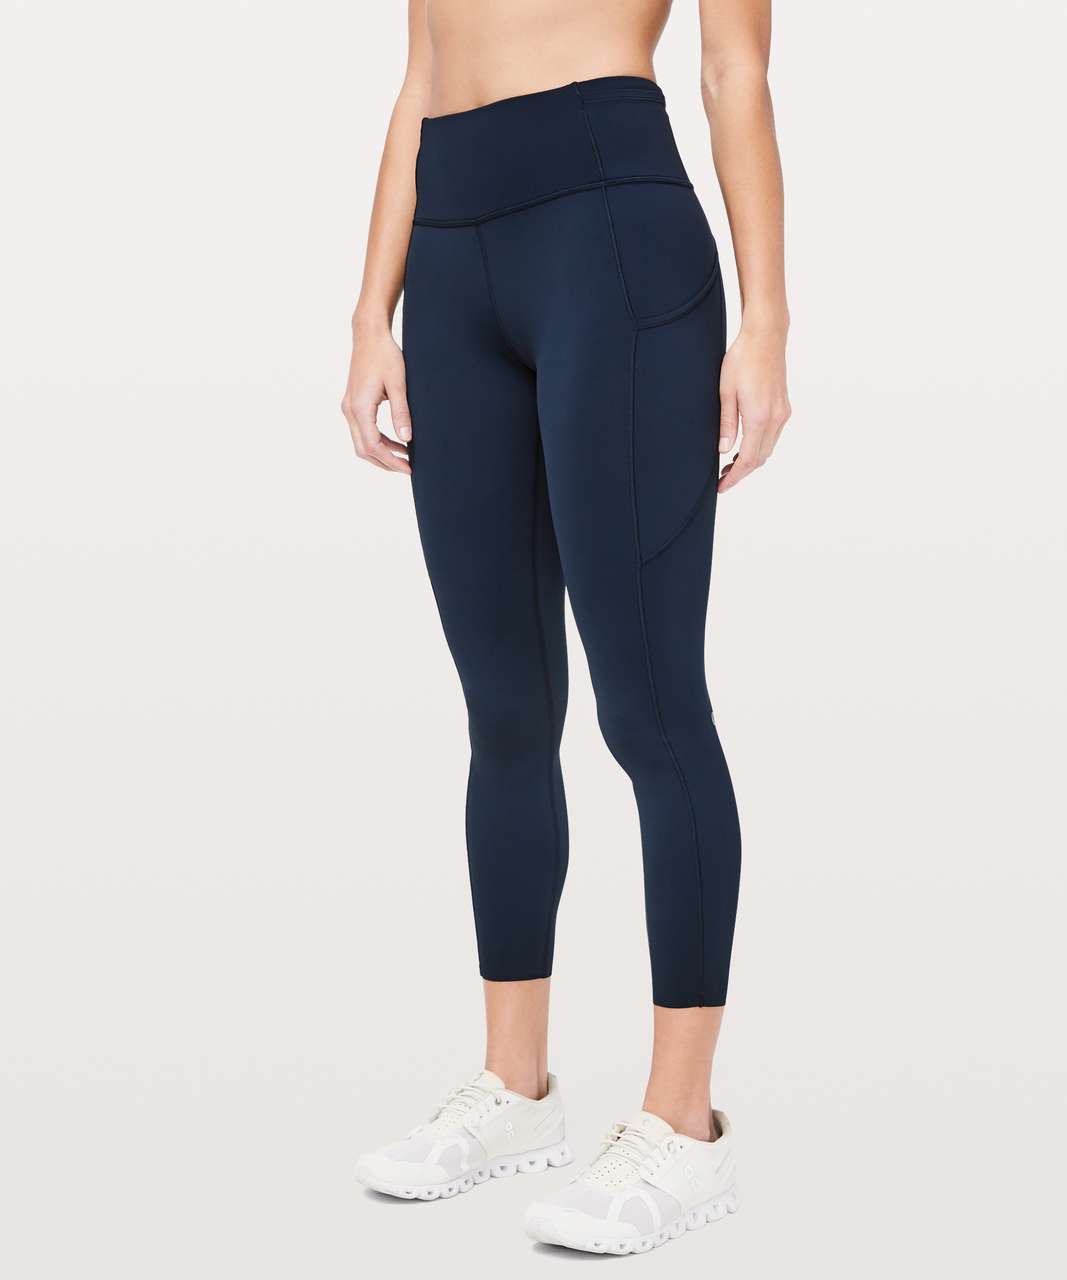 Lululemon Fast & Free 7/8 Tight II *Non-Reflective Nulux 25